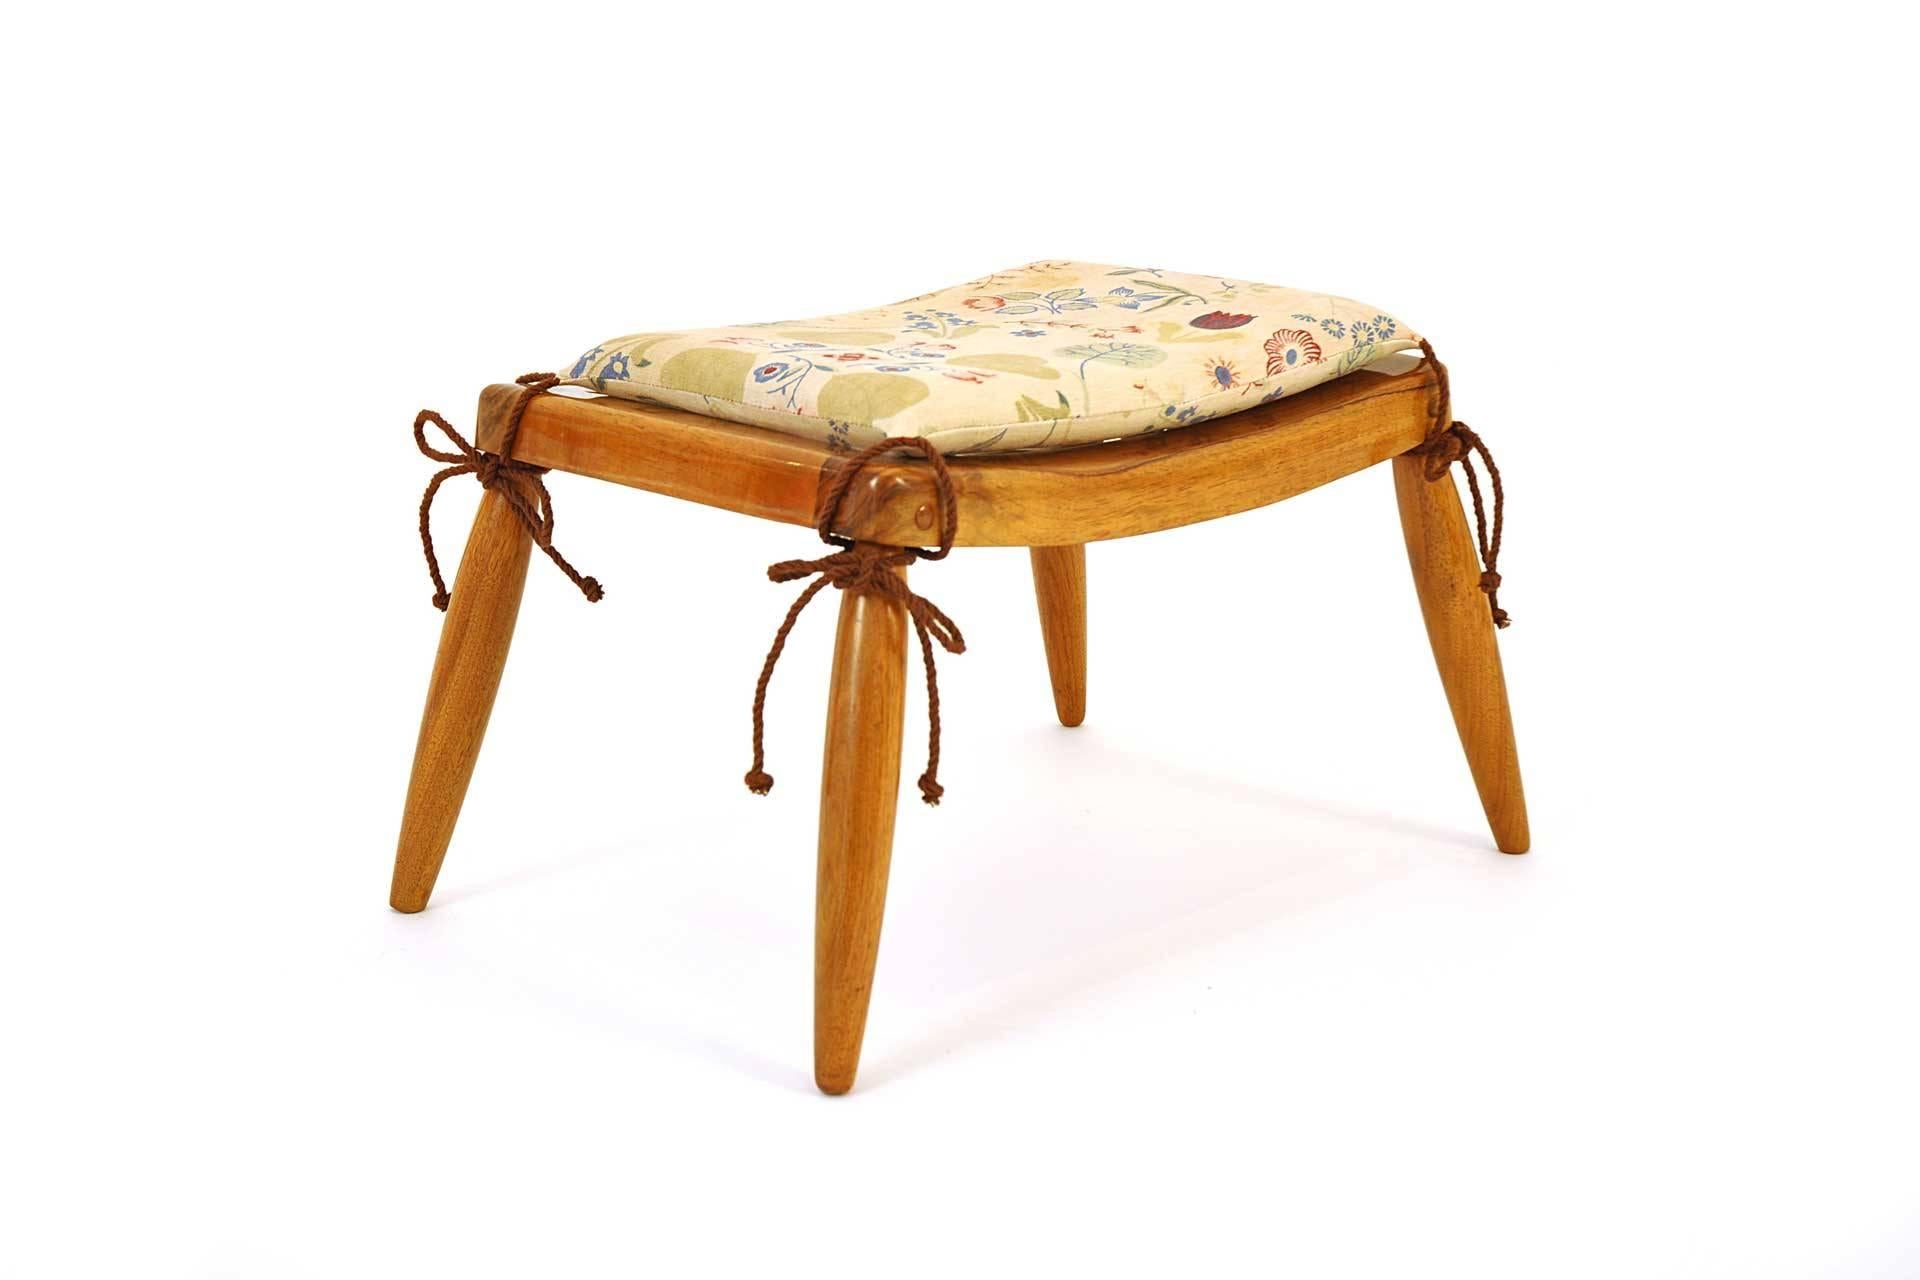 This stool was probably designed by Anna-Lülja Praun in 1930s. The furniture frame is made of walnut and polished. The seat has steel springs and loose hassock. It has also new upholstery.